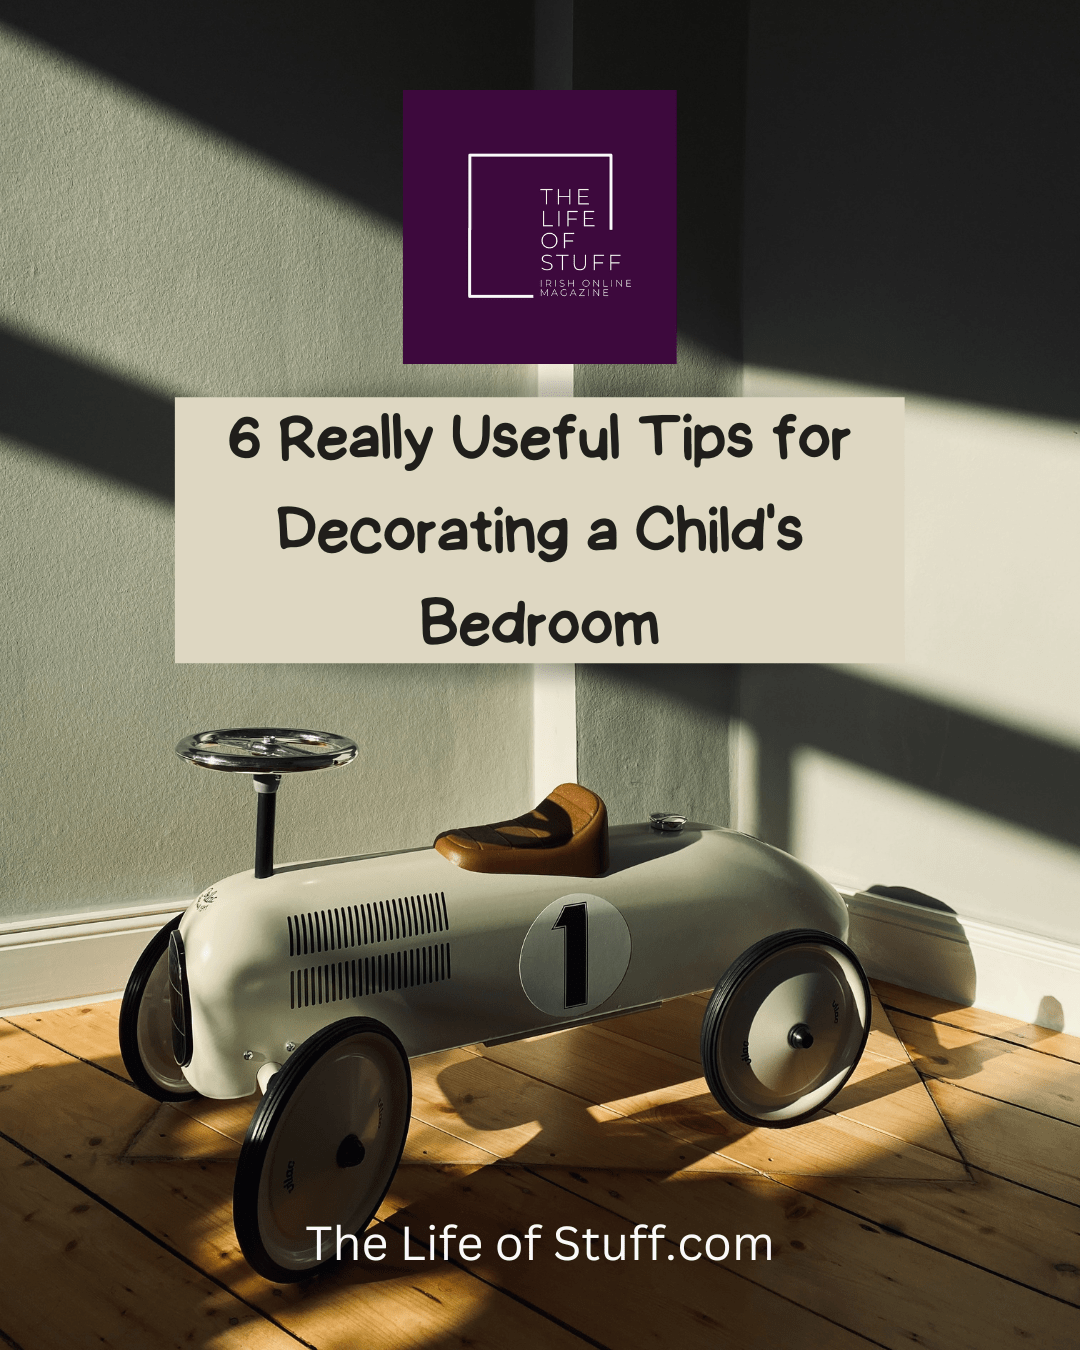 6 Really Useful Tips for Decorating a Child's Bedroom - the life of stuff